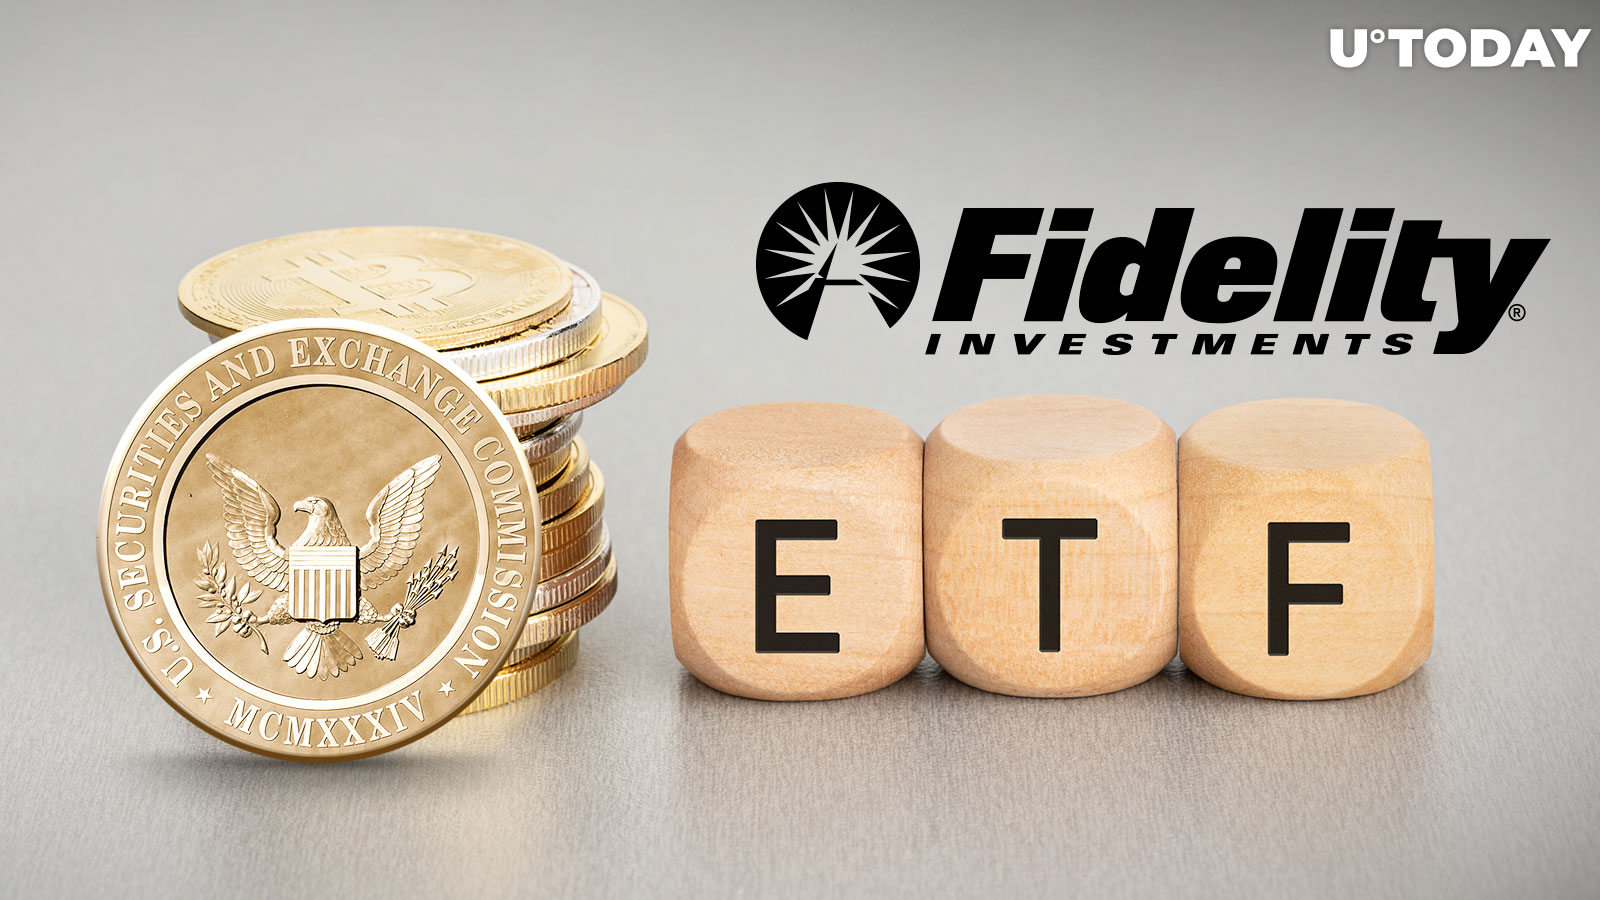 SEC Files Fidelity’s ETF, but Approval Odds Remain Low